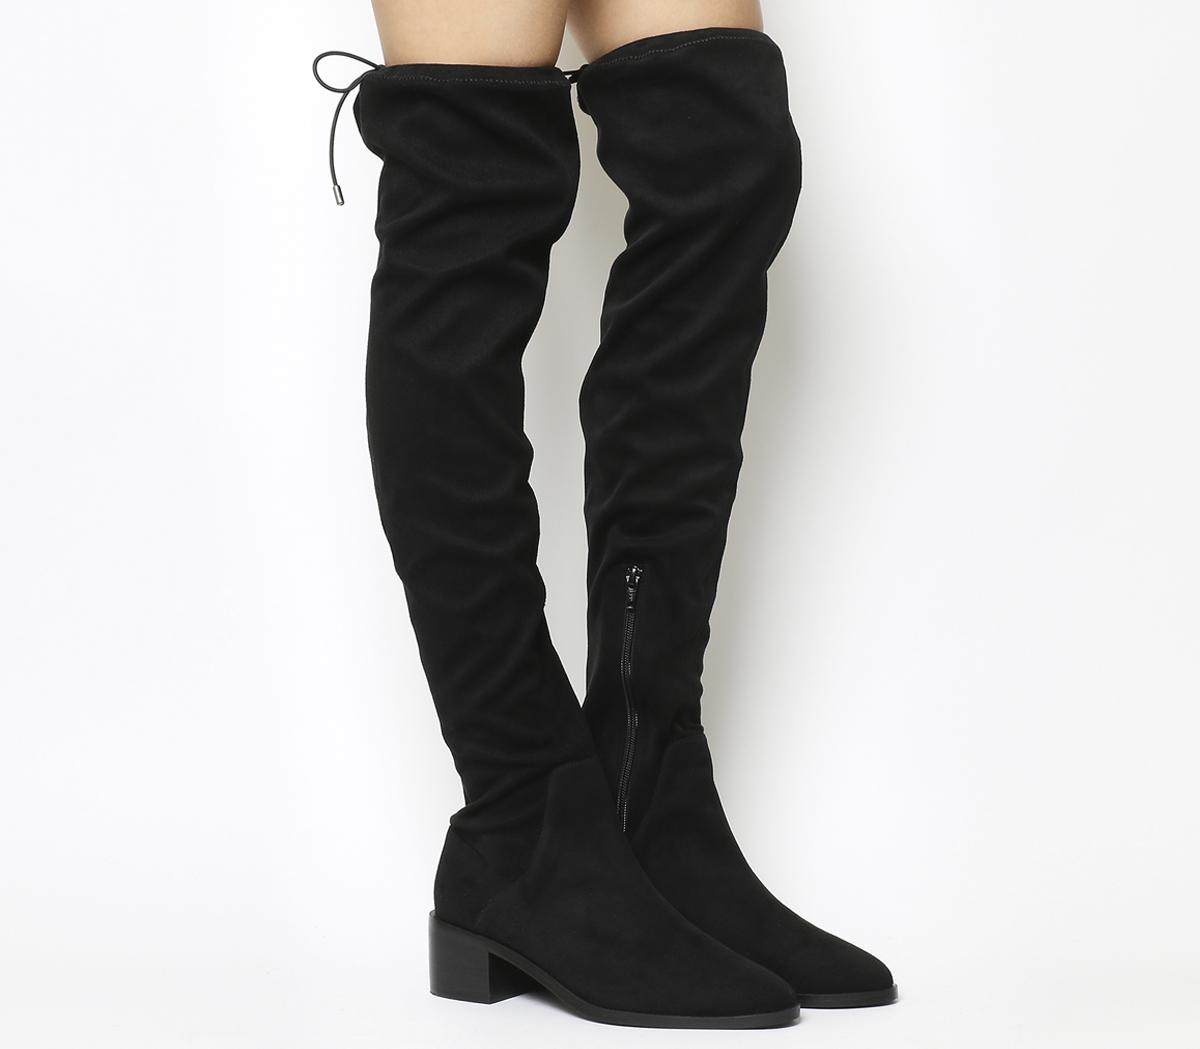 black over the knee boots small heel